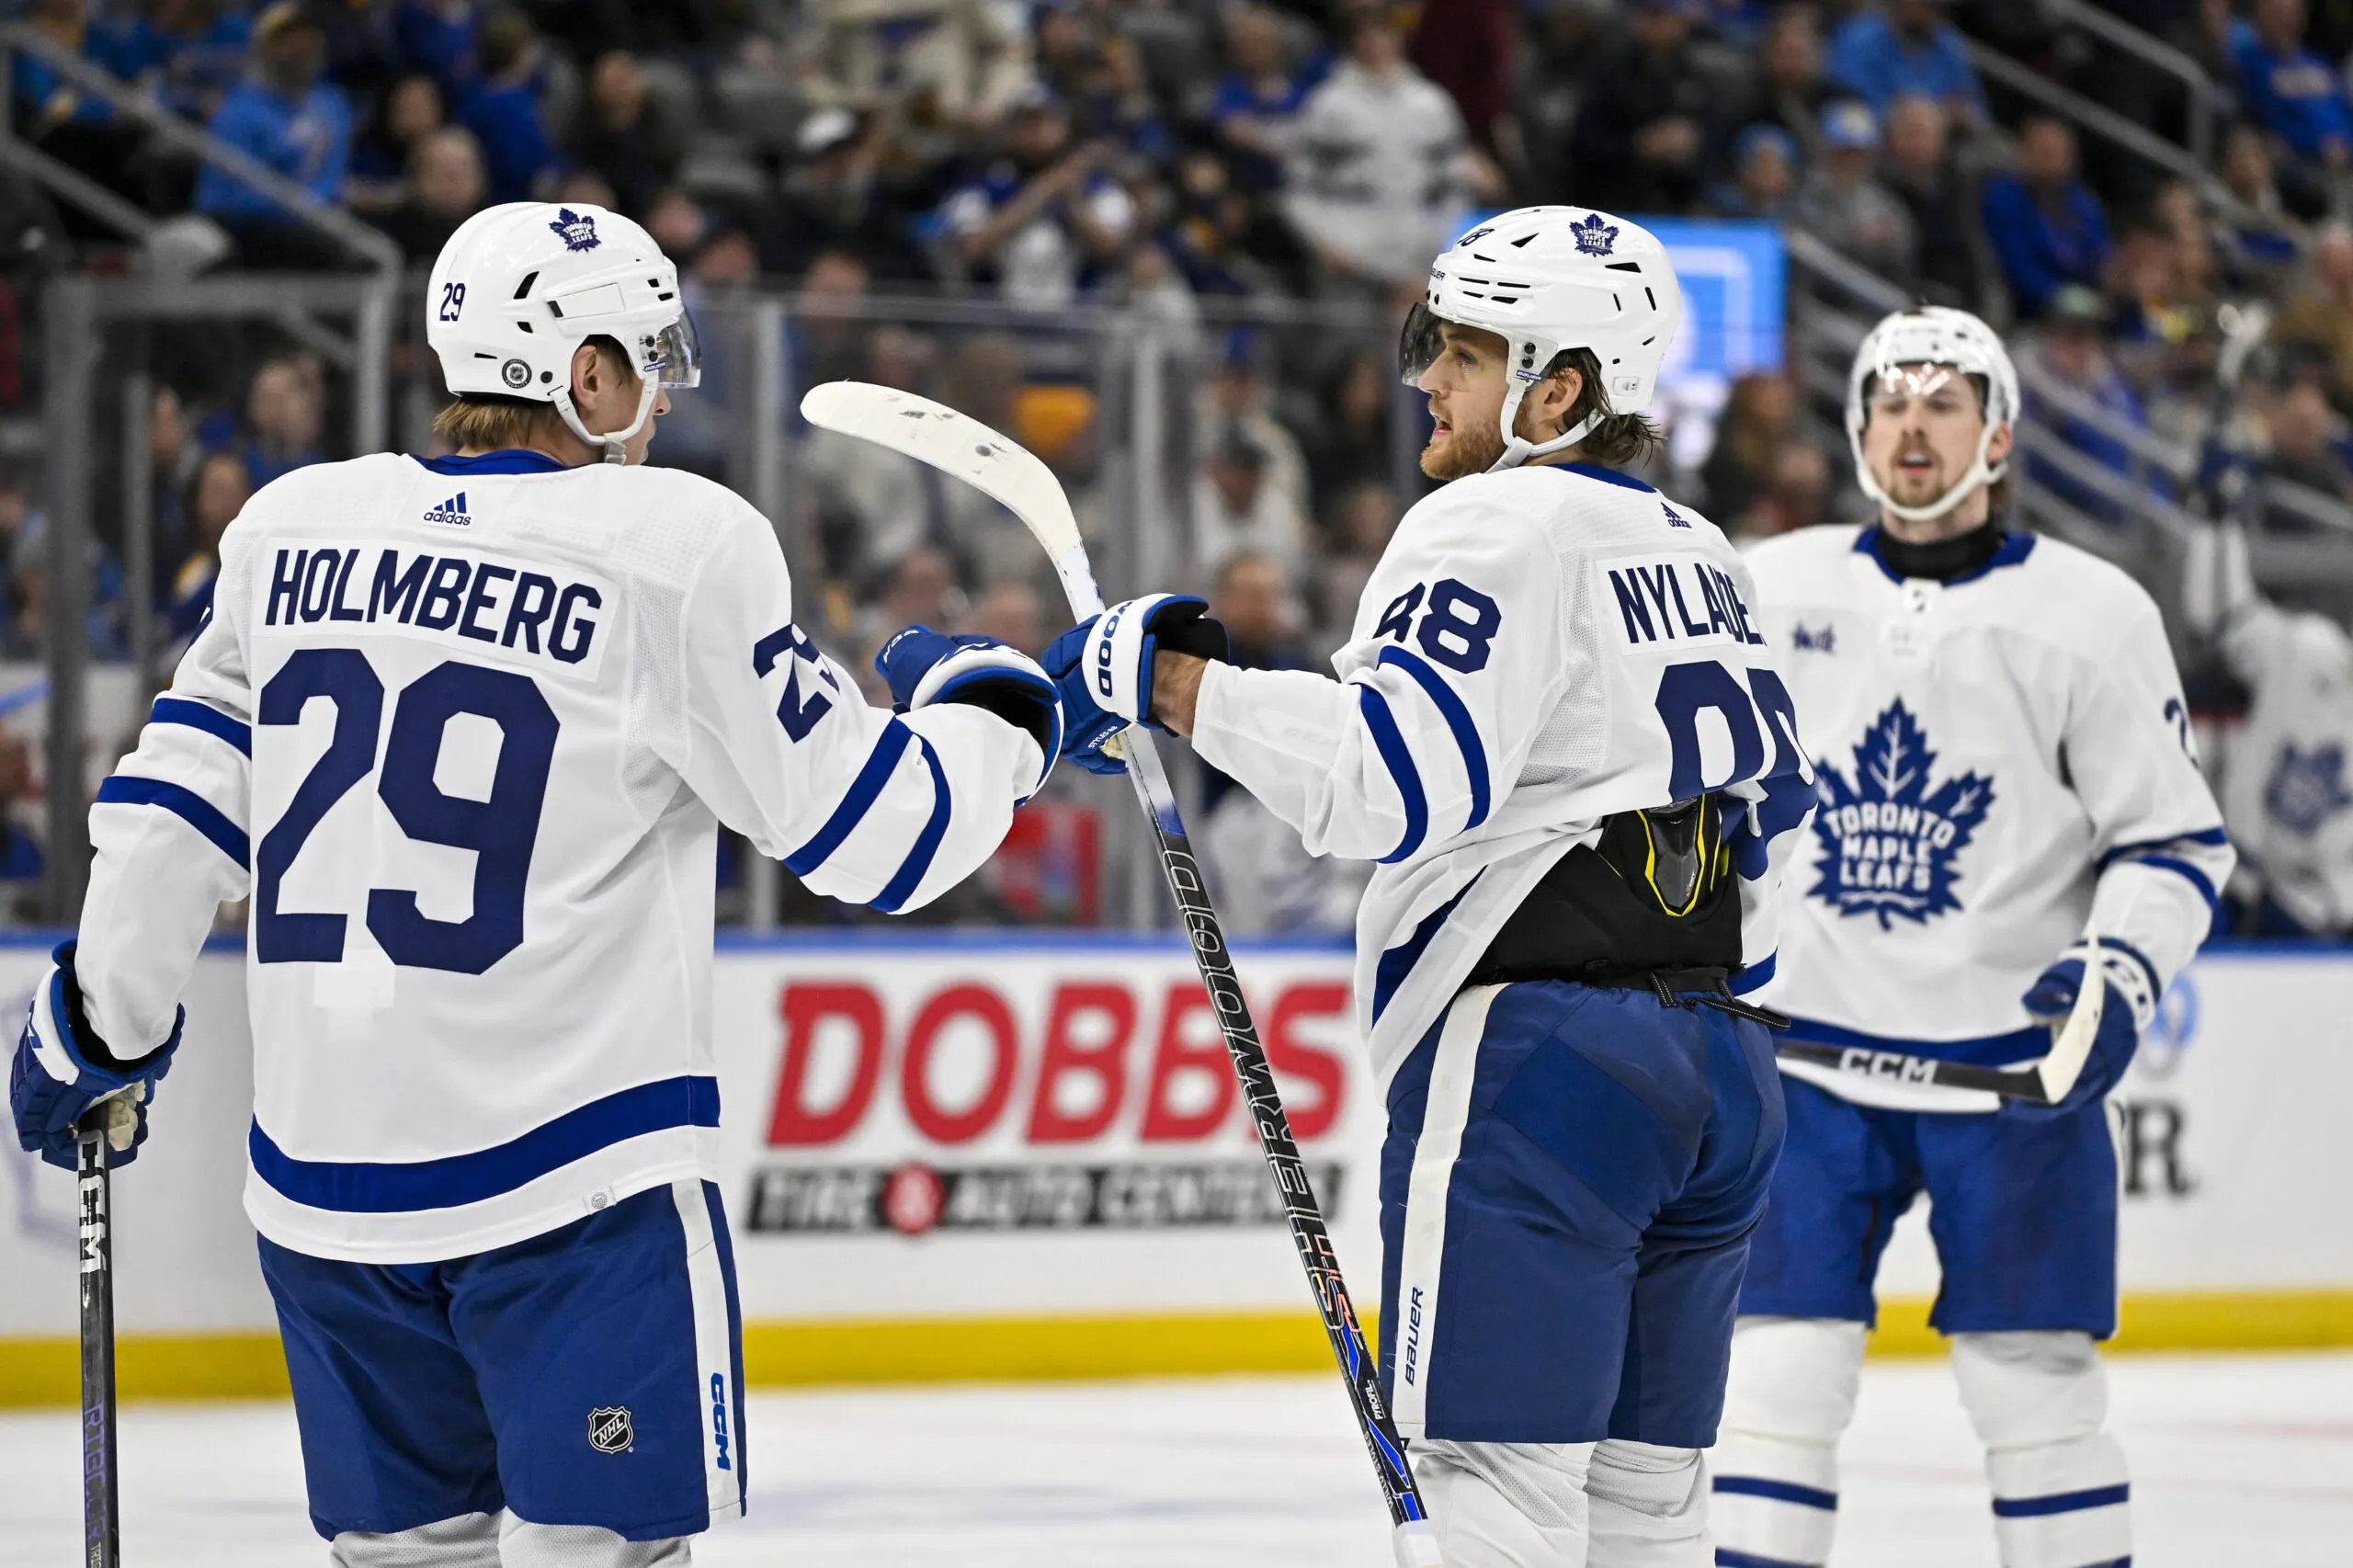 Toronto Maple Leafs become first team in 32 years to avoid being